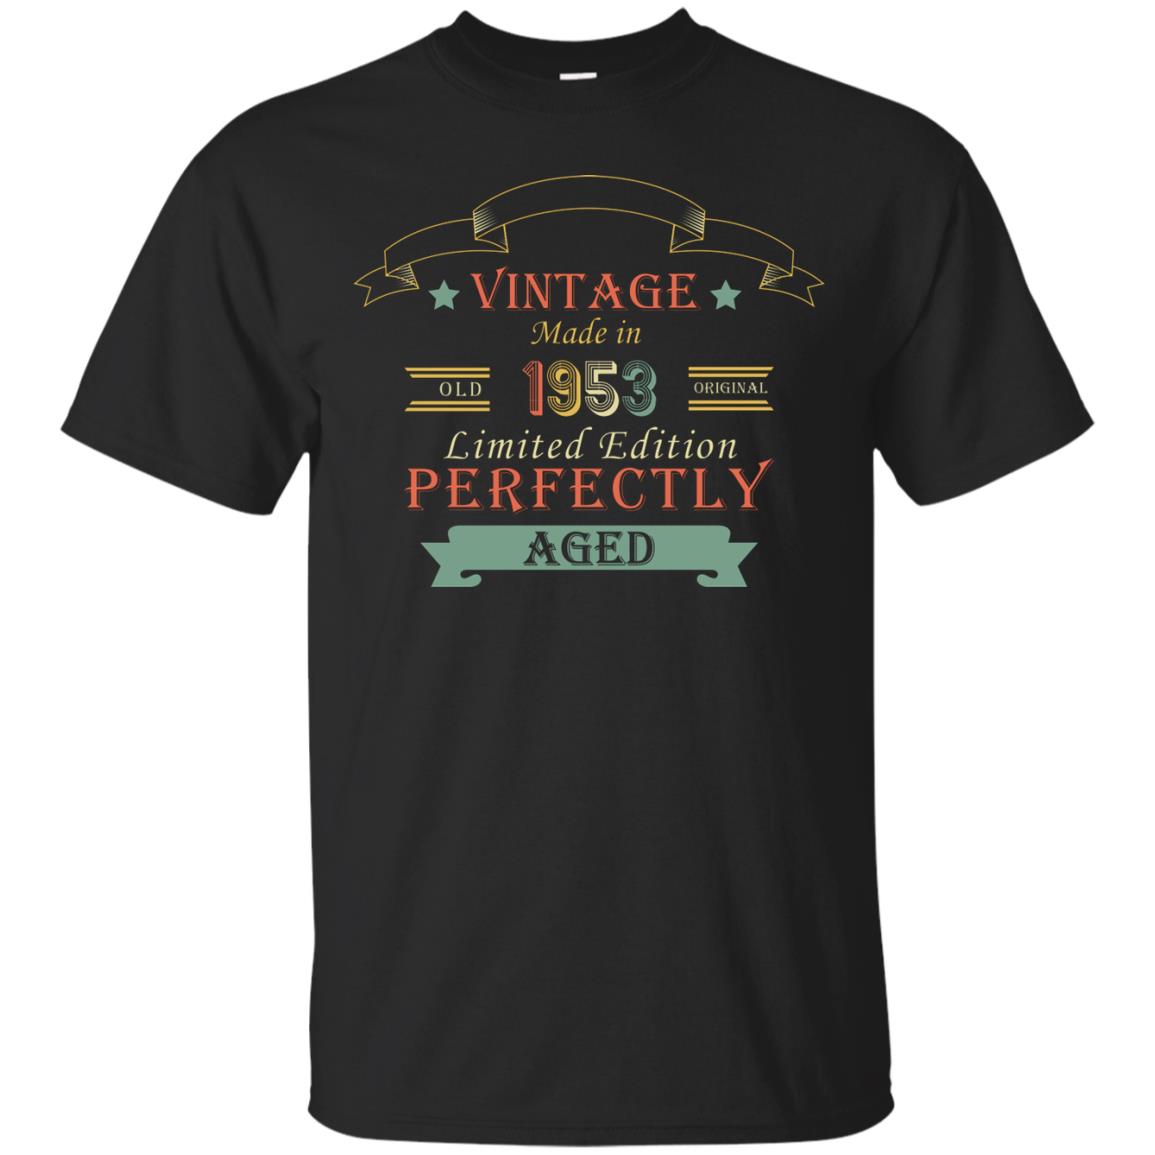 Vintage Made In Old 1953 Original Limited Edition Perfectly Aged 65th Birthday T-shirtG200 Gildan Ultra Cotton T-Shirt